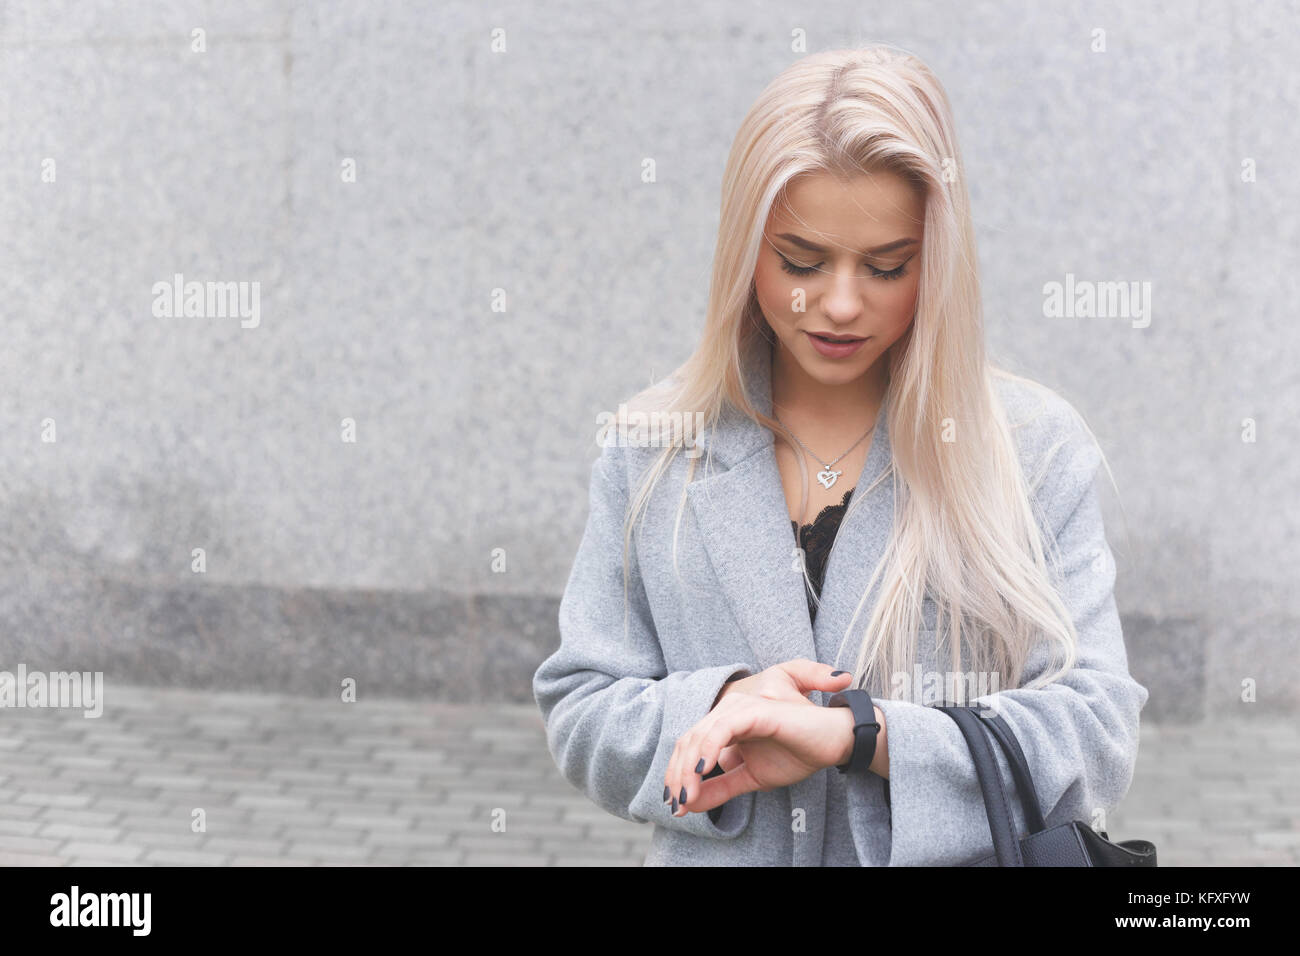 Portrait of young blondhair elegantly dressed woman in a coat uses a smart bracelet standing outdoors. Stock Photo